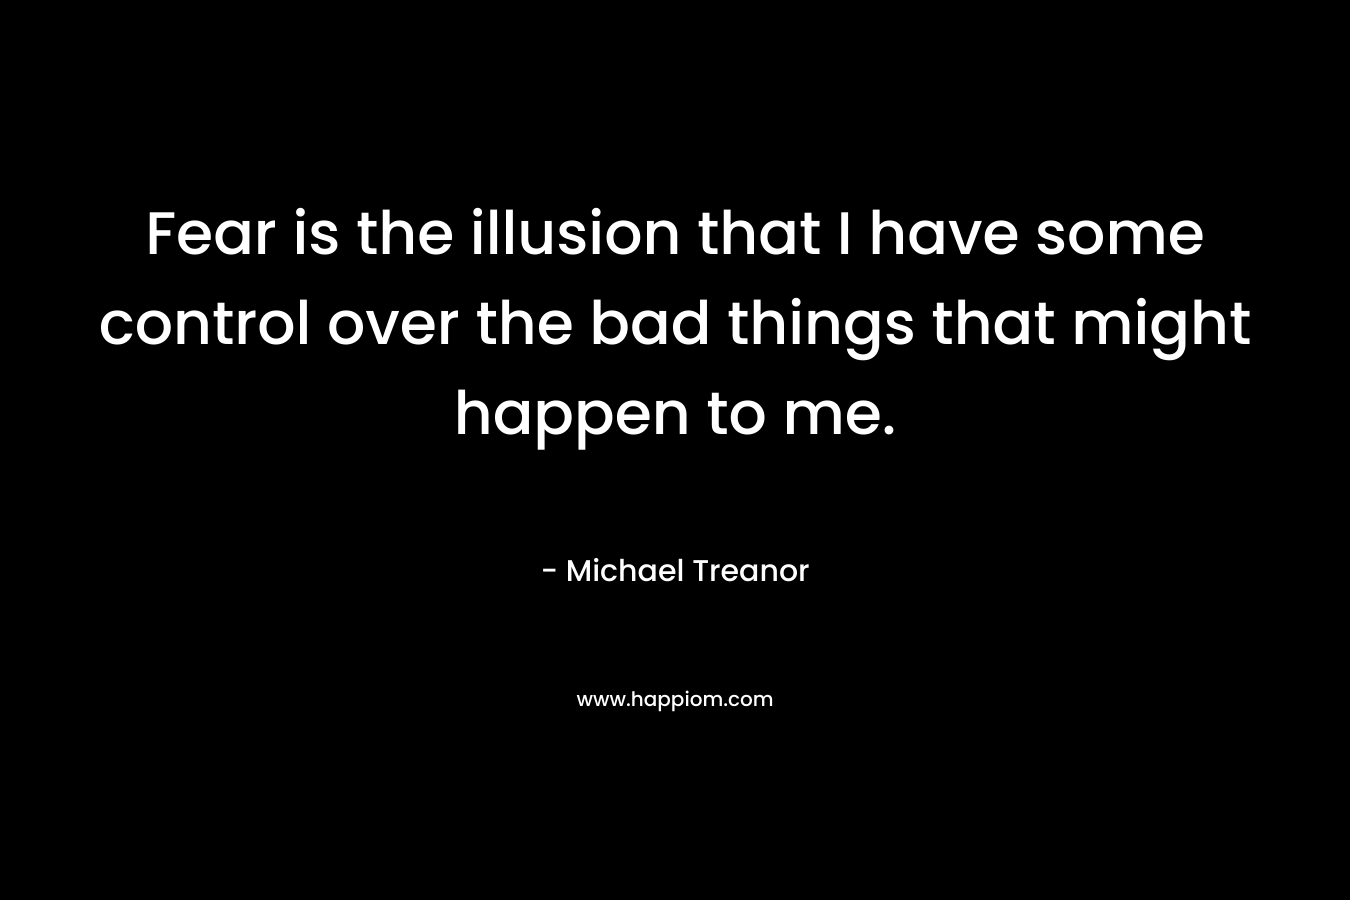 Fear is the illusion that I have some control over the bad things that might happen to me. – Michael Treanor